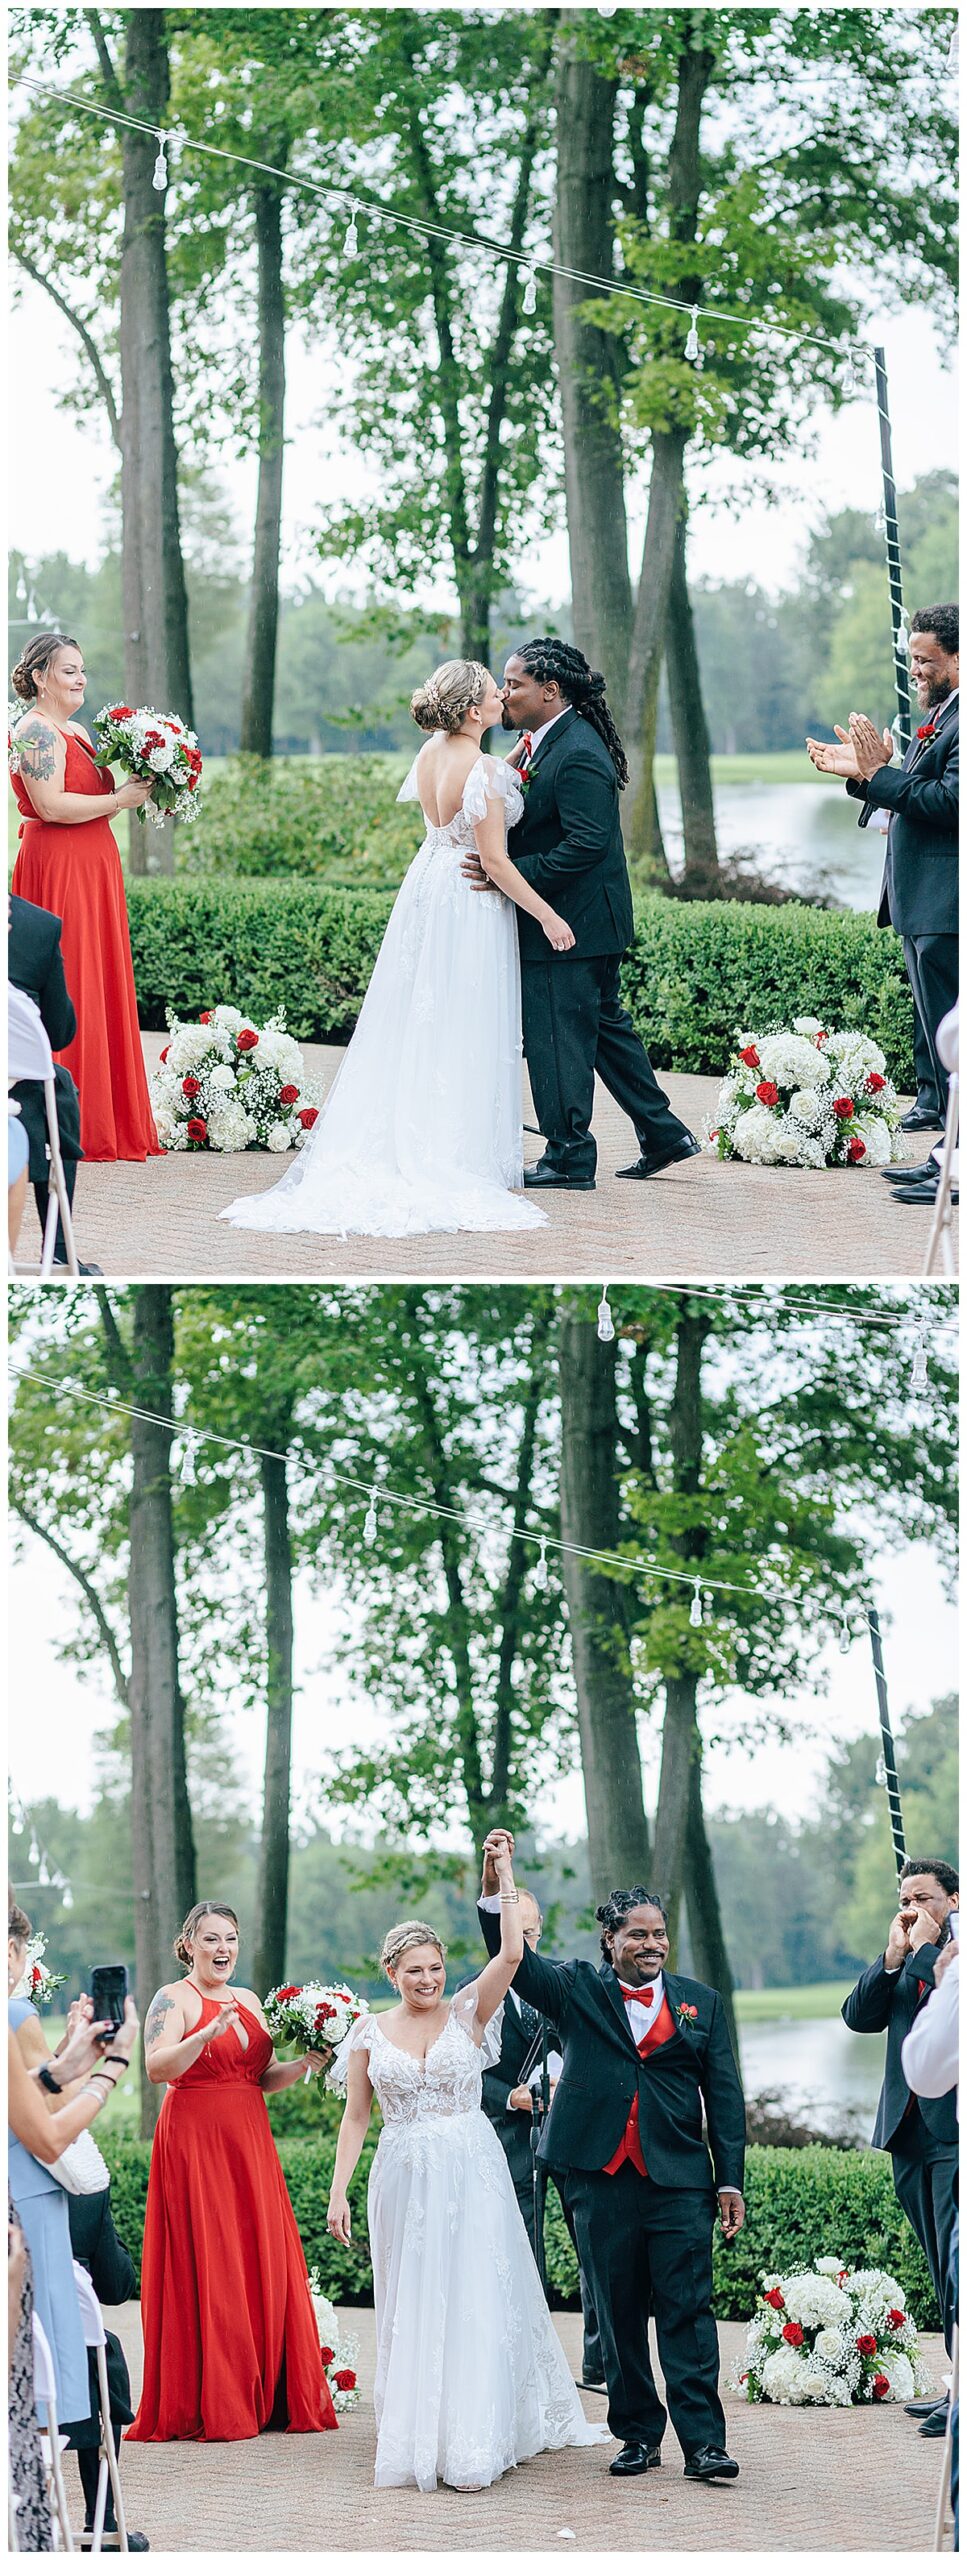 Bride and groom share a kiss at Cherry Creek Golf Club